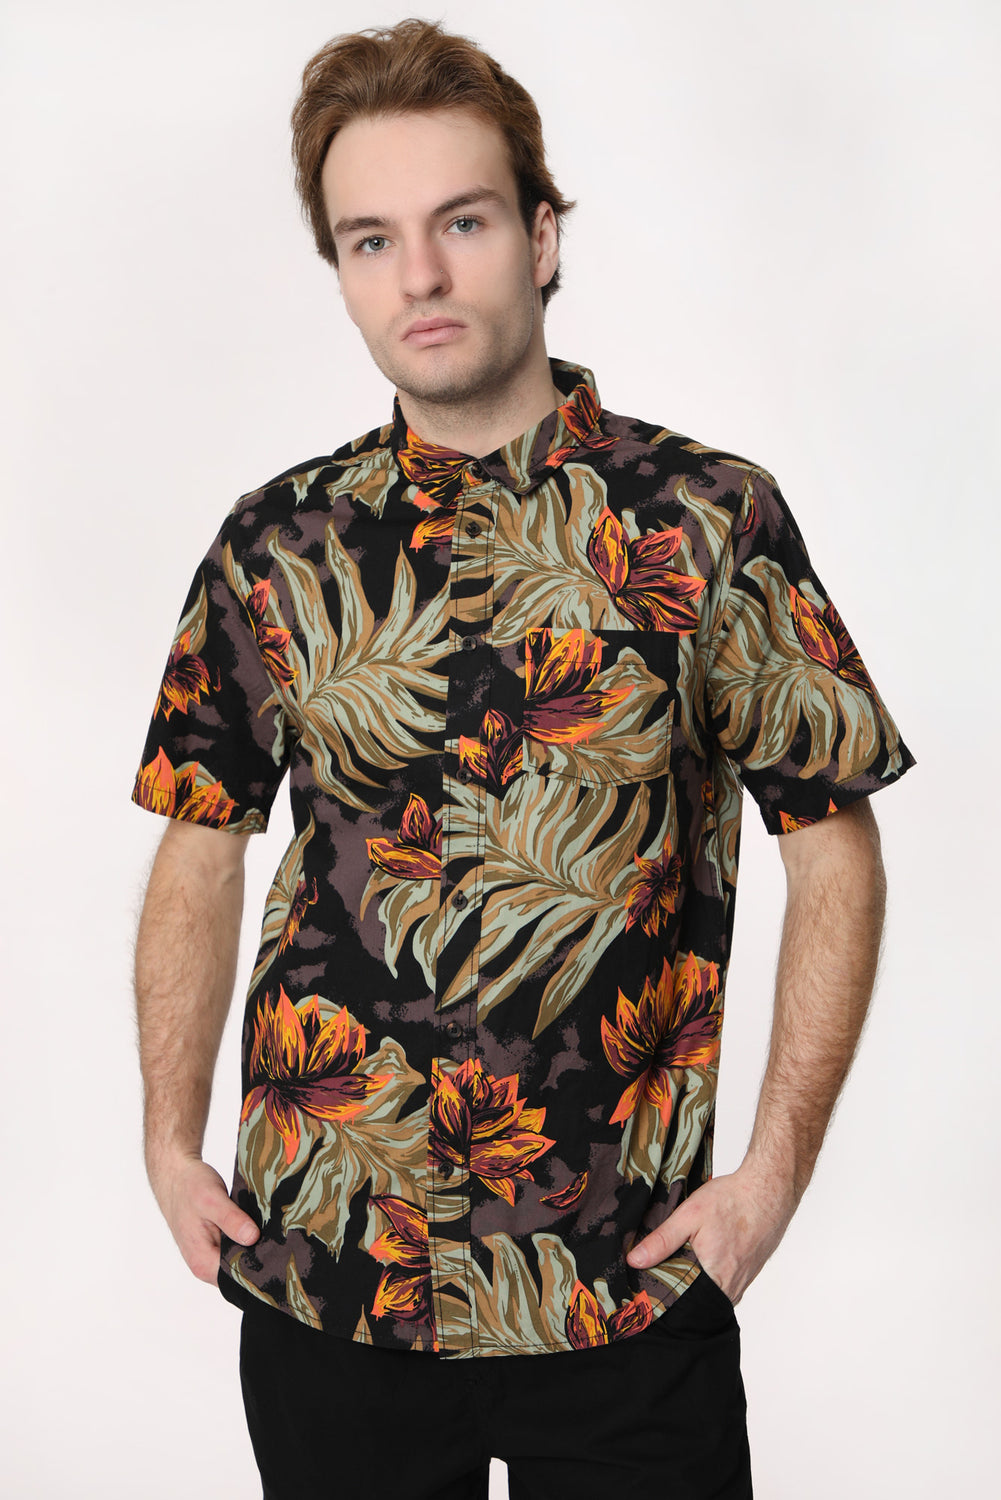 Zoo York Mens Tropical Printed Button-Up Zoo York Mens Tropical Printed Button-Up